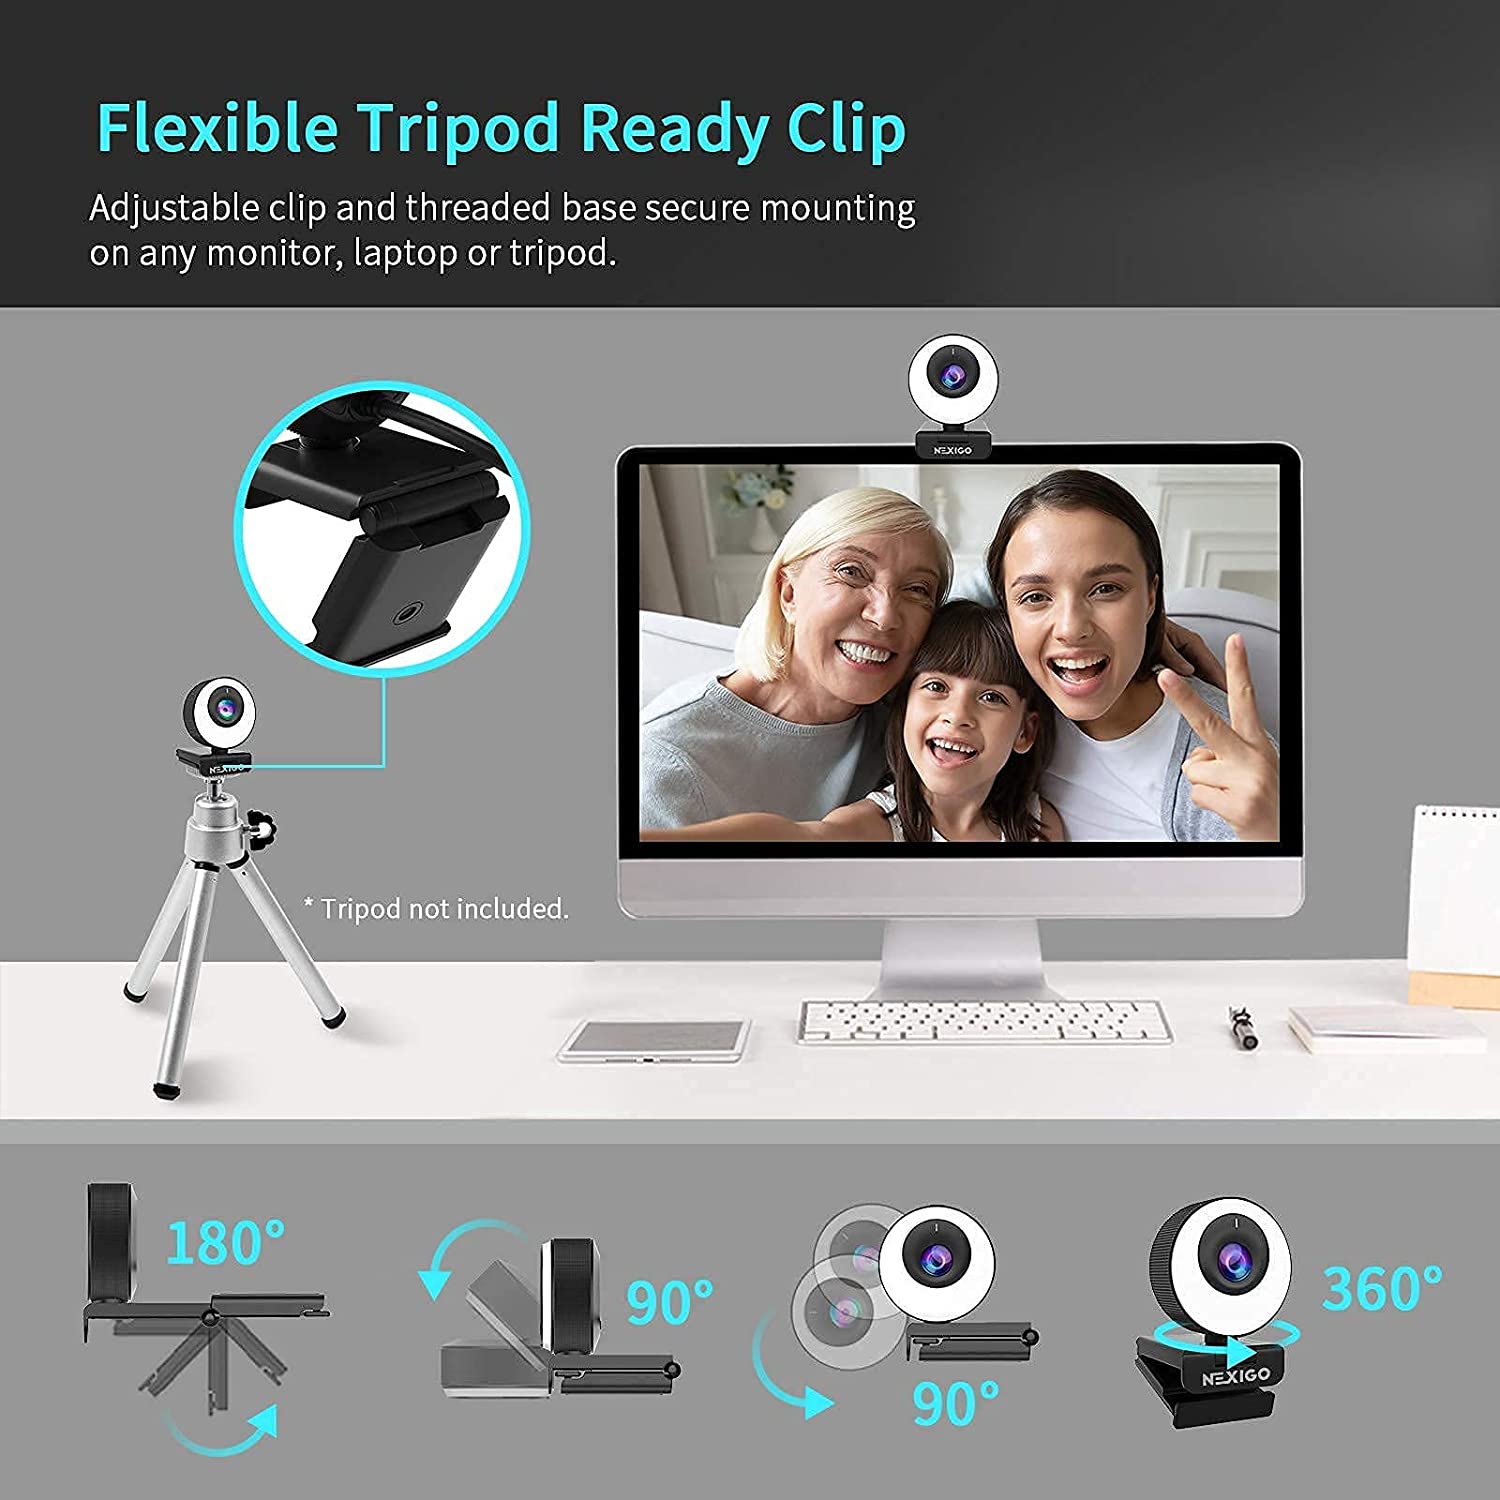 The flexible webcam adjustment can be fixed on a computer or tripod.